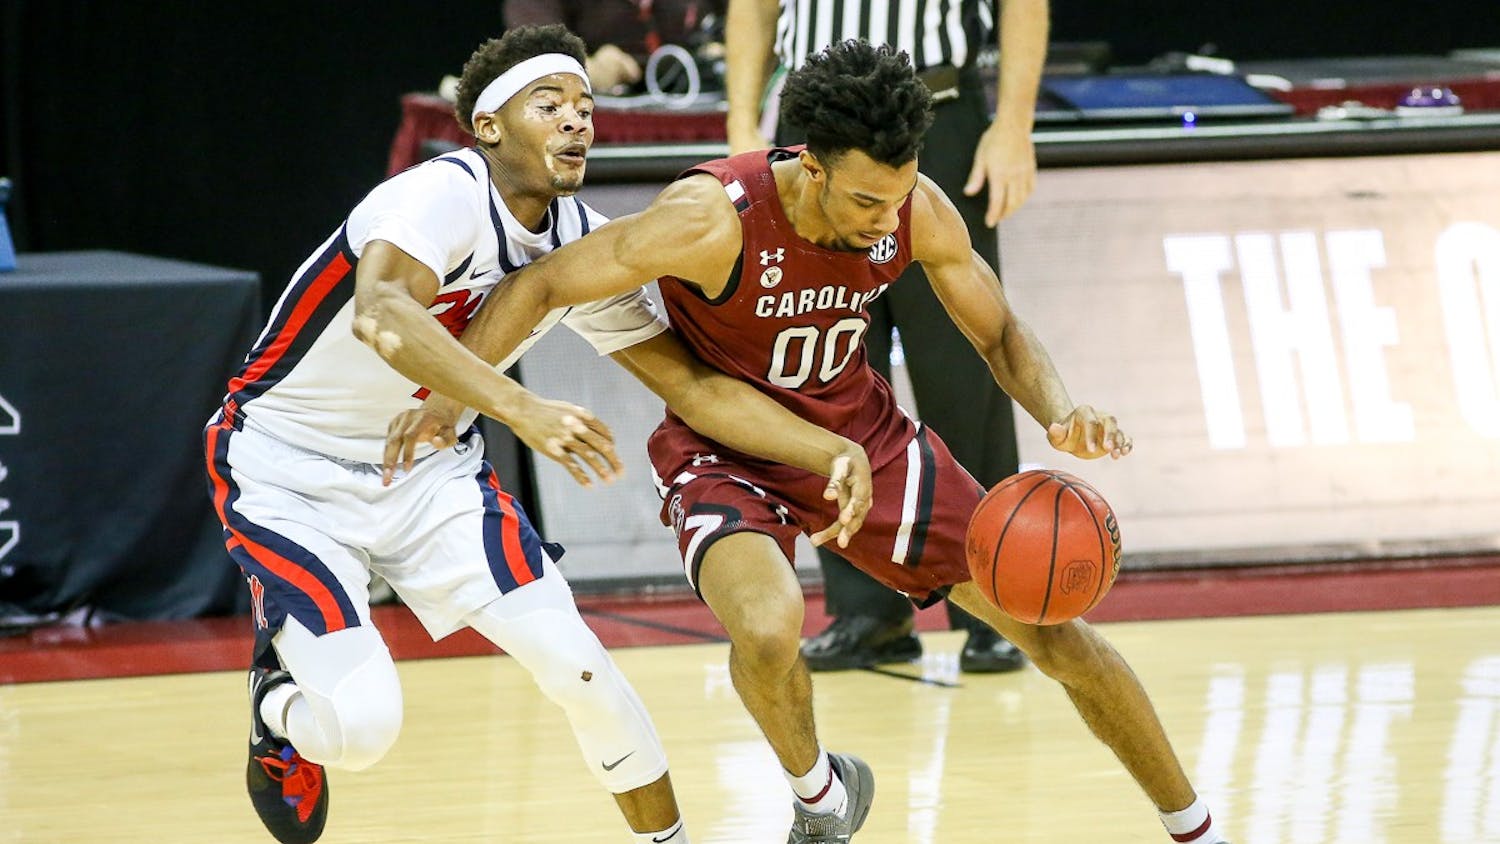 Junior guard A.J. Lawson dribbles the ball during the Ole Miss game. South Carolina lost 81-74.